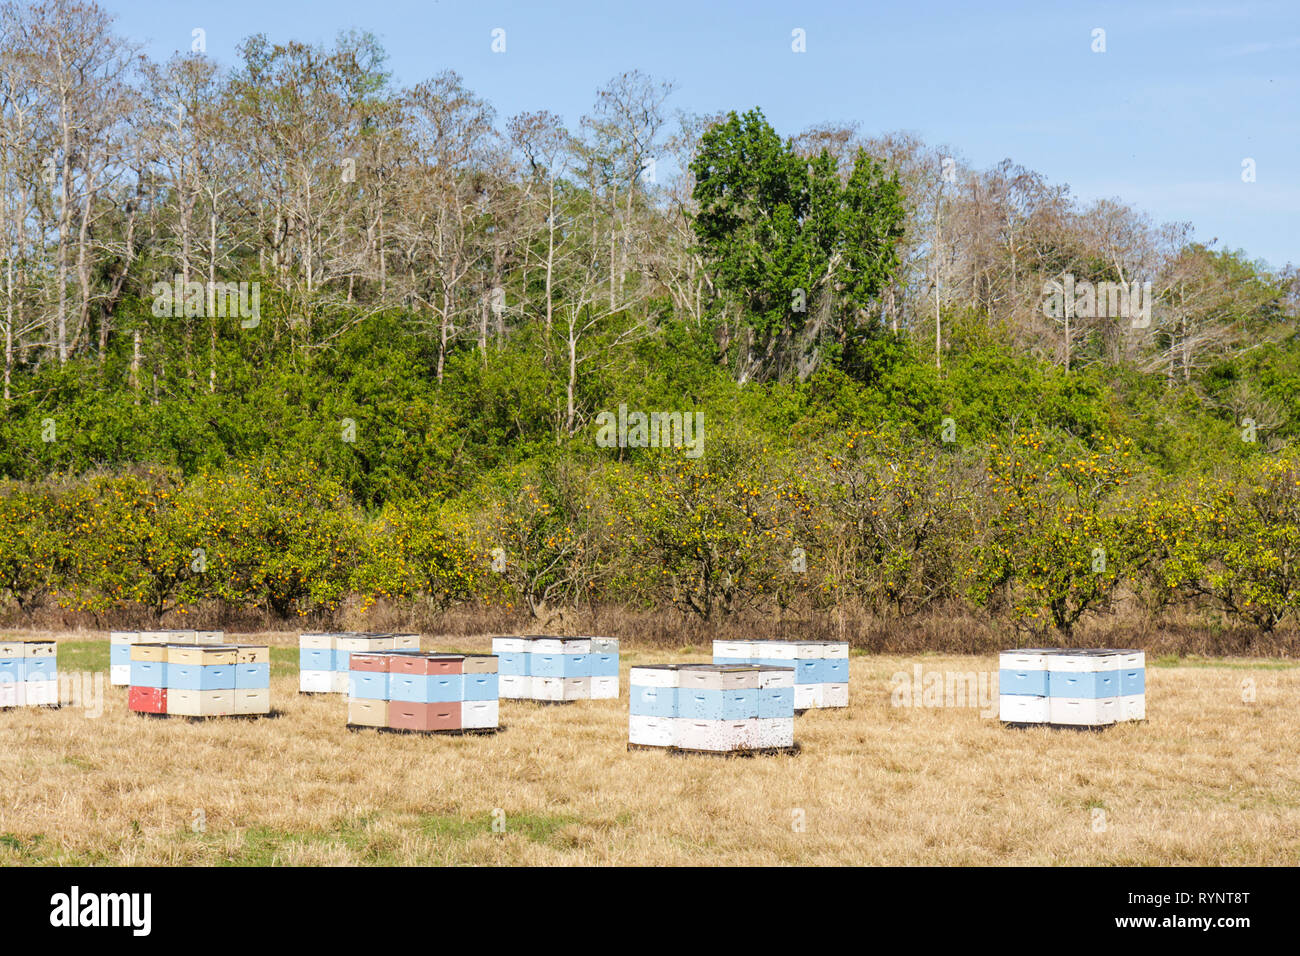 Florida Hendry County,Big Cypress,Seminole Indian Reservation,Native American Indian indigenous peoples,orange grove,beehive,man made,honey bee,domest Stock Photo